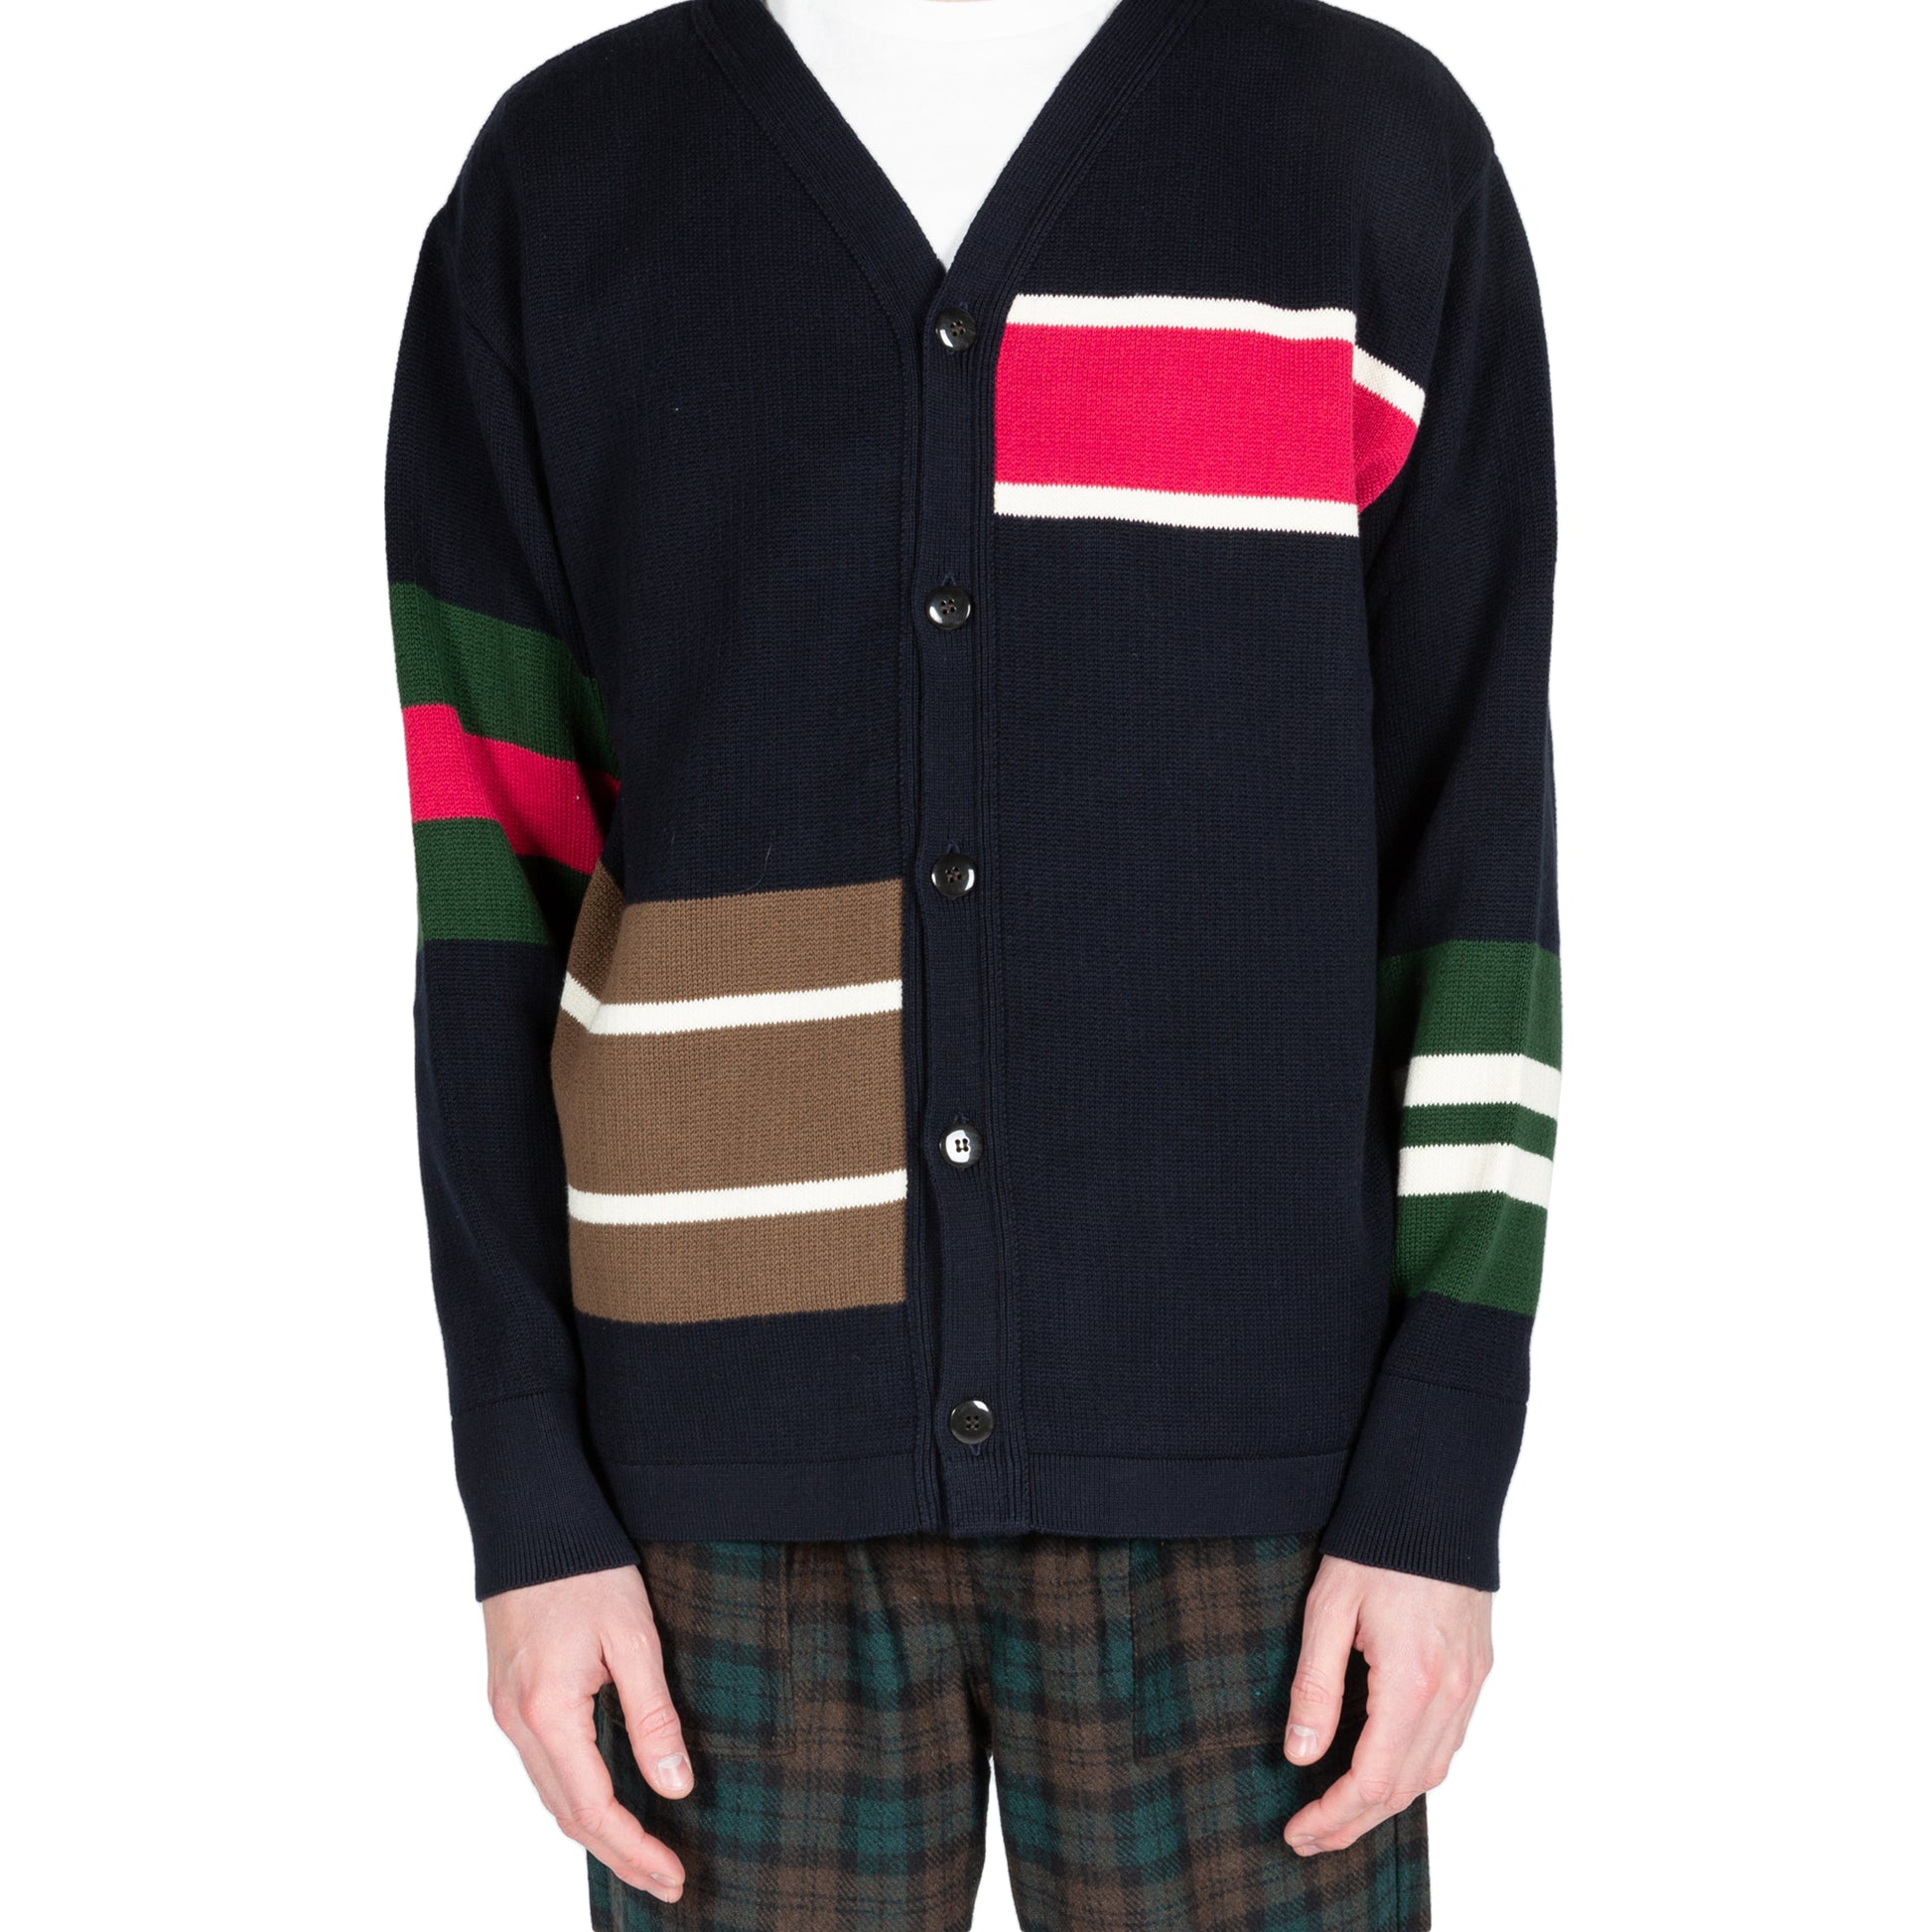 The English Difference Over Cardigan in Navy by Garbstore